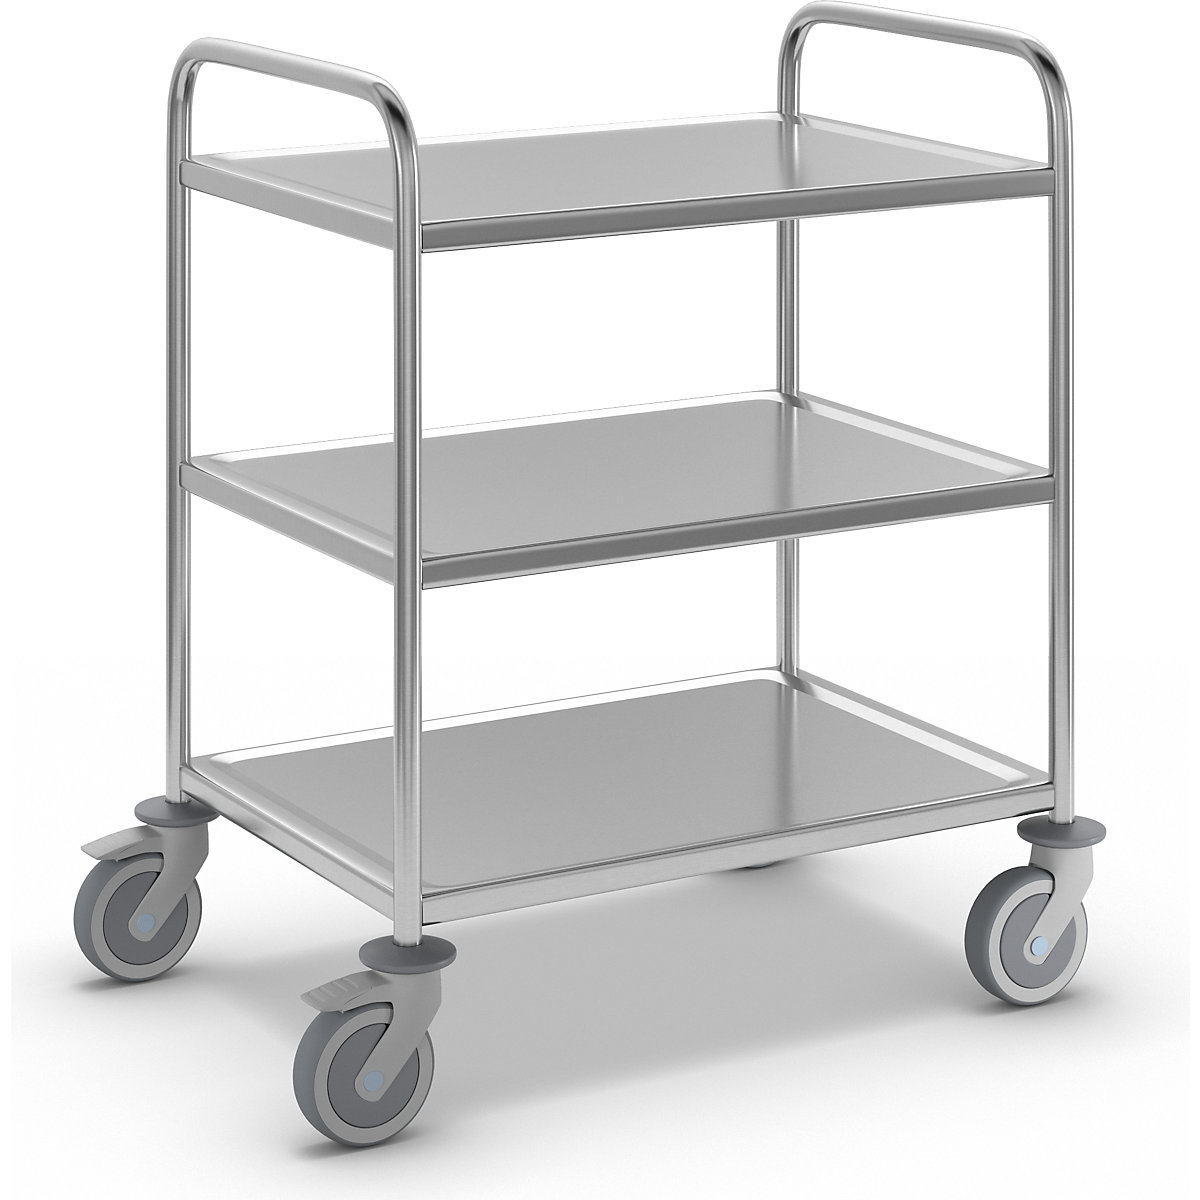 Stainless steel serving trolley – Kongamek, LxWxH 910 x 590 x 965 mm, with 3 shelves-7